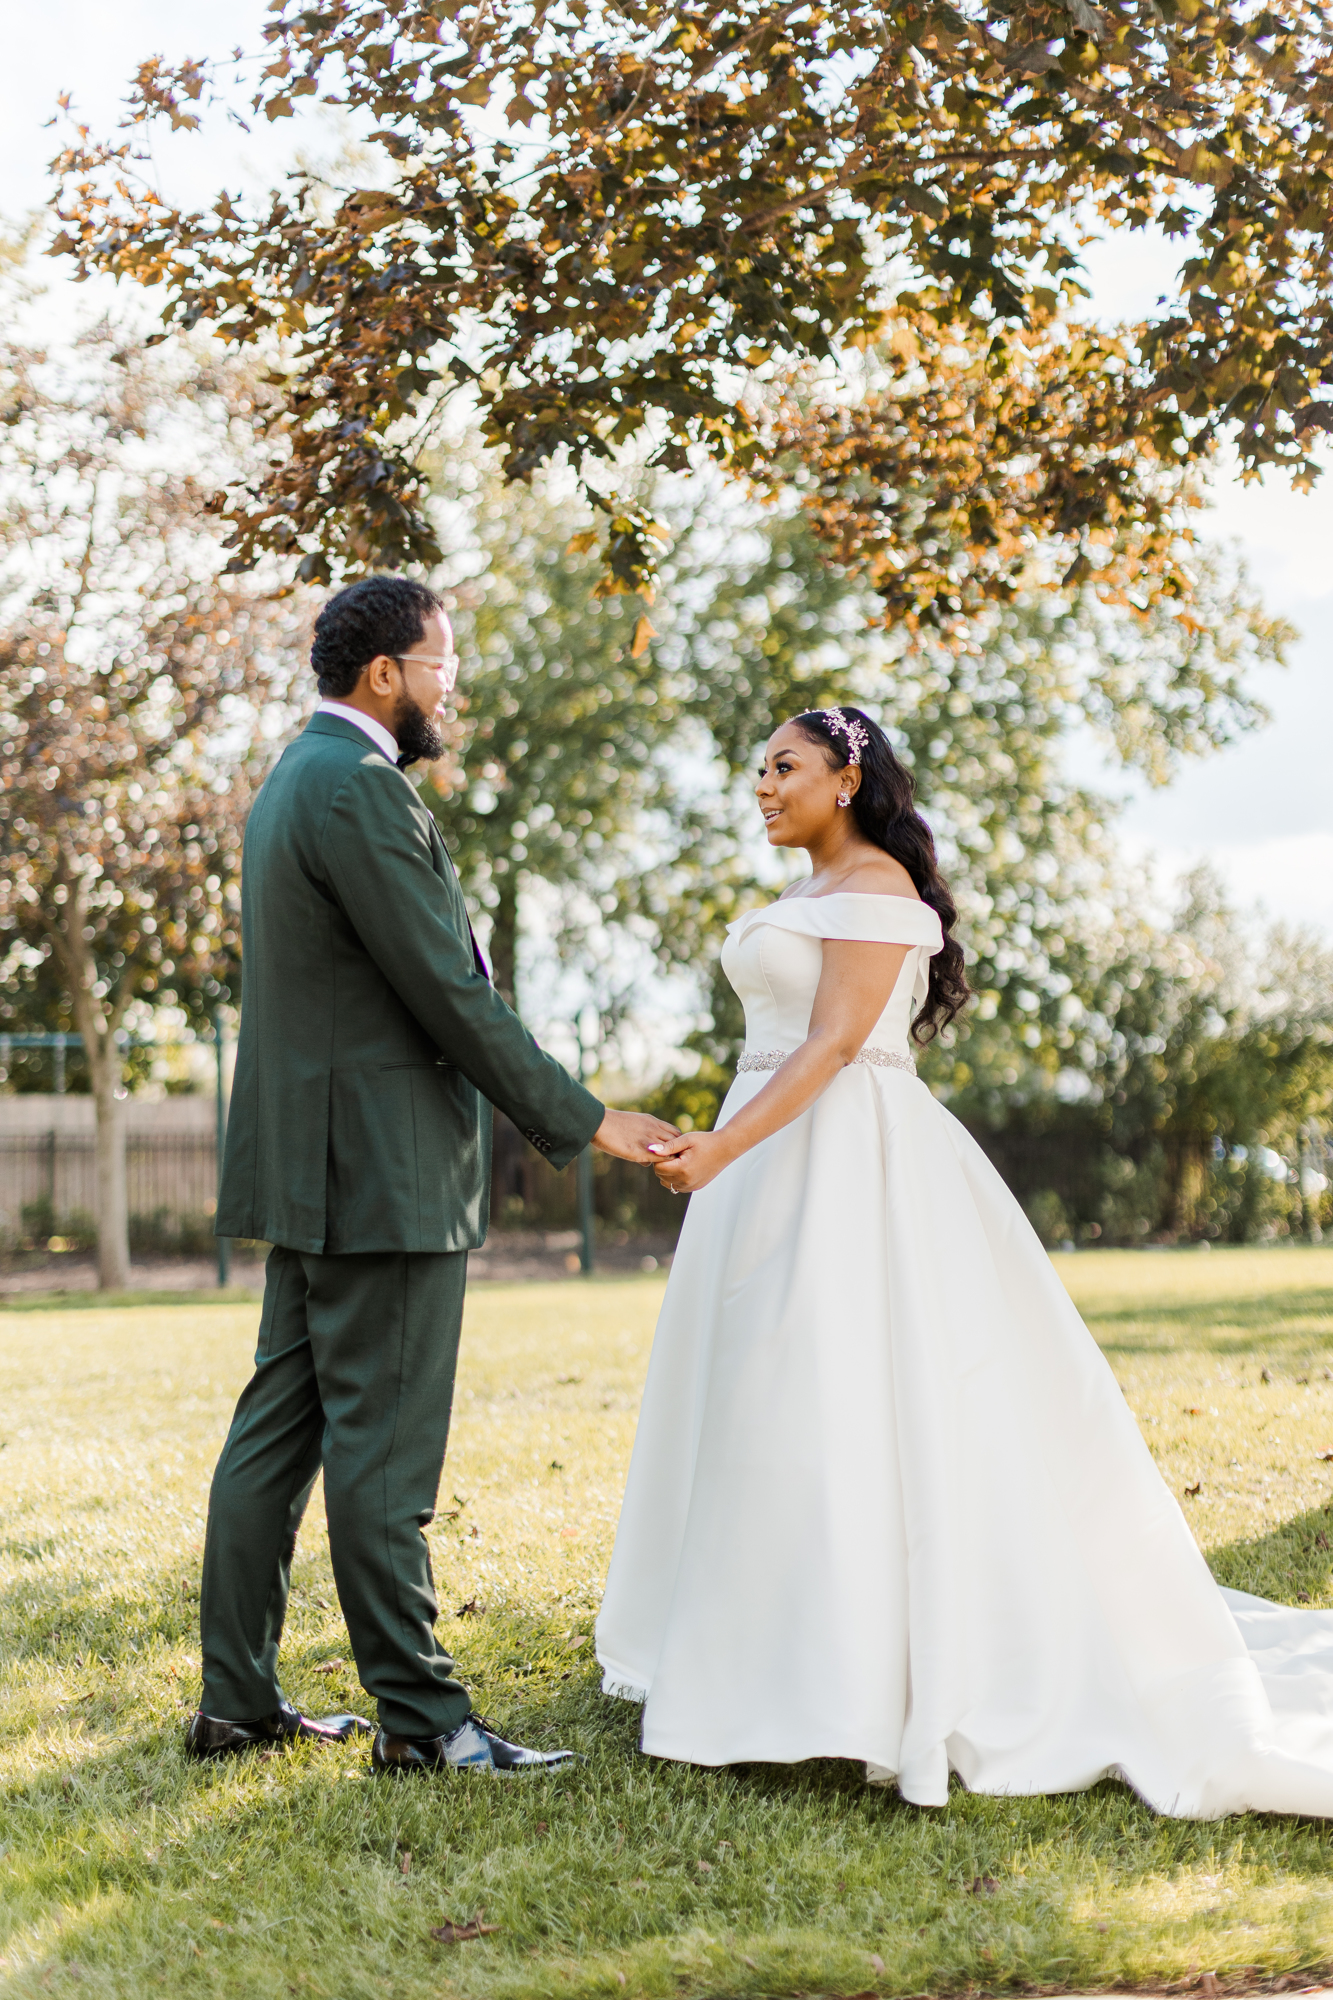 Emotional New Jersey Wedding Photos at Edgewood Country Club in Fall